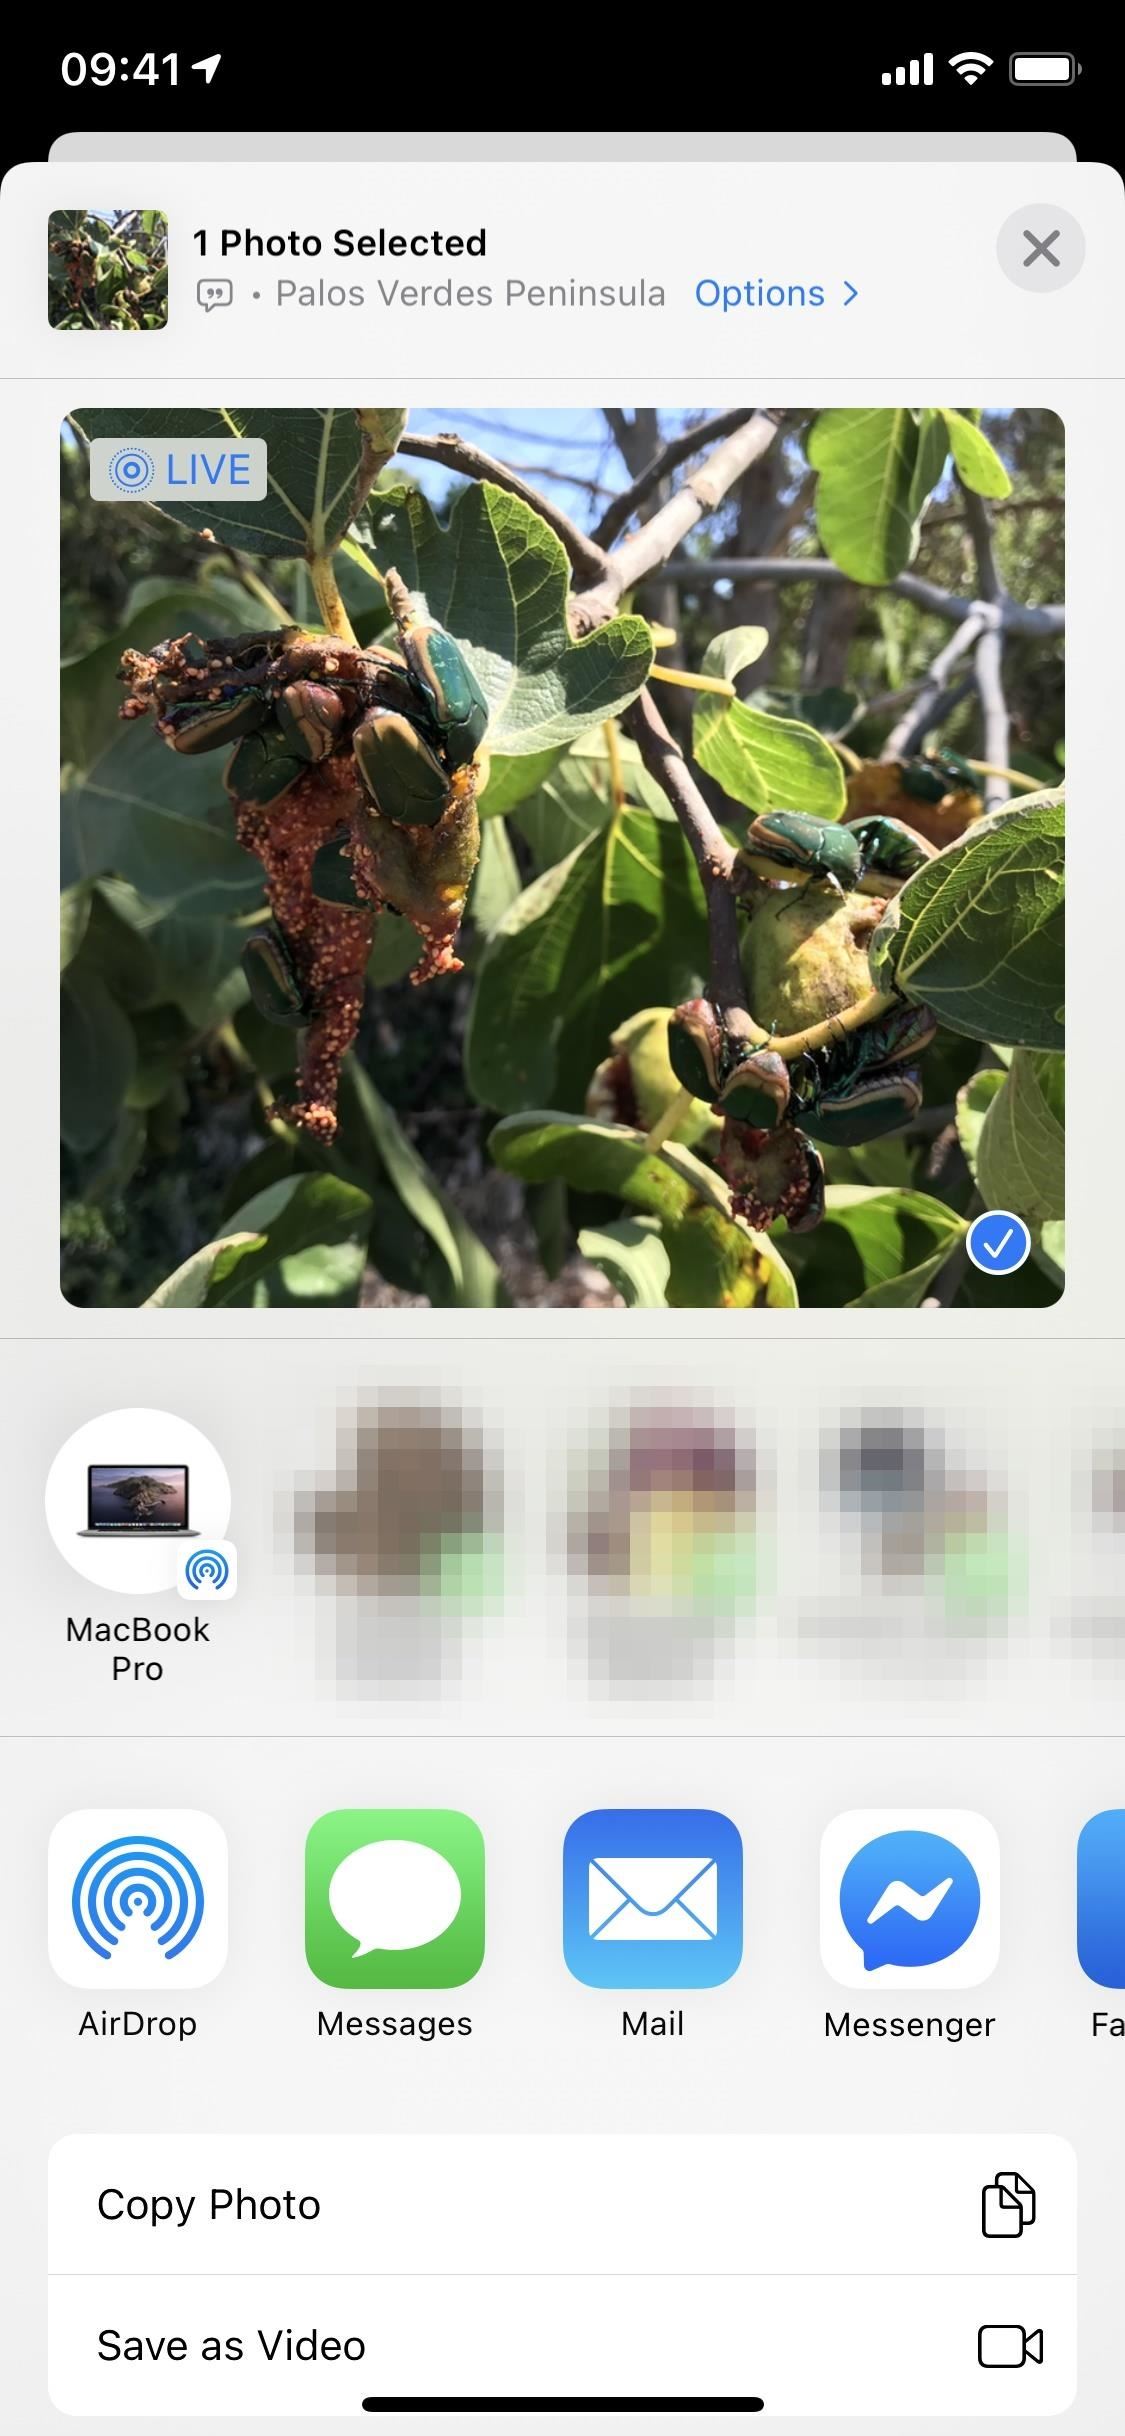 How to Add Captions to Photos & Videos in iOS 14 to Make Searching by Metadata Easier